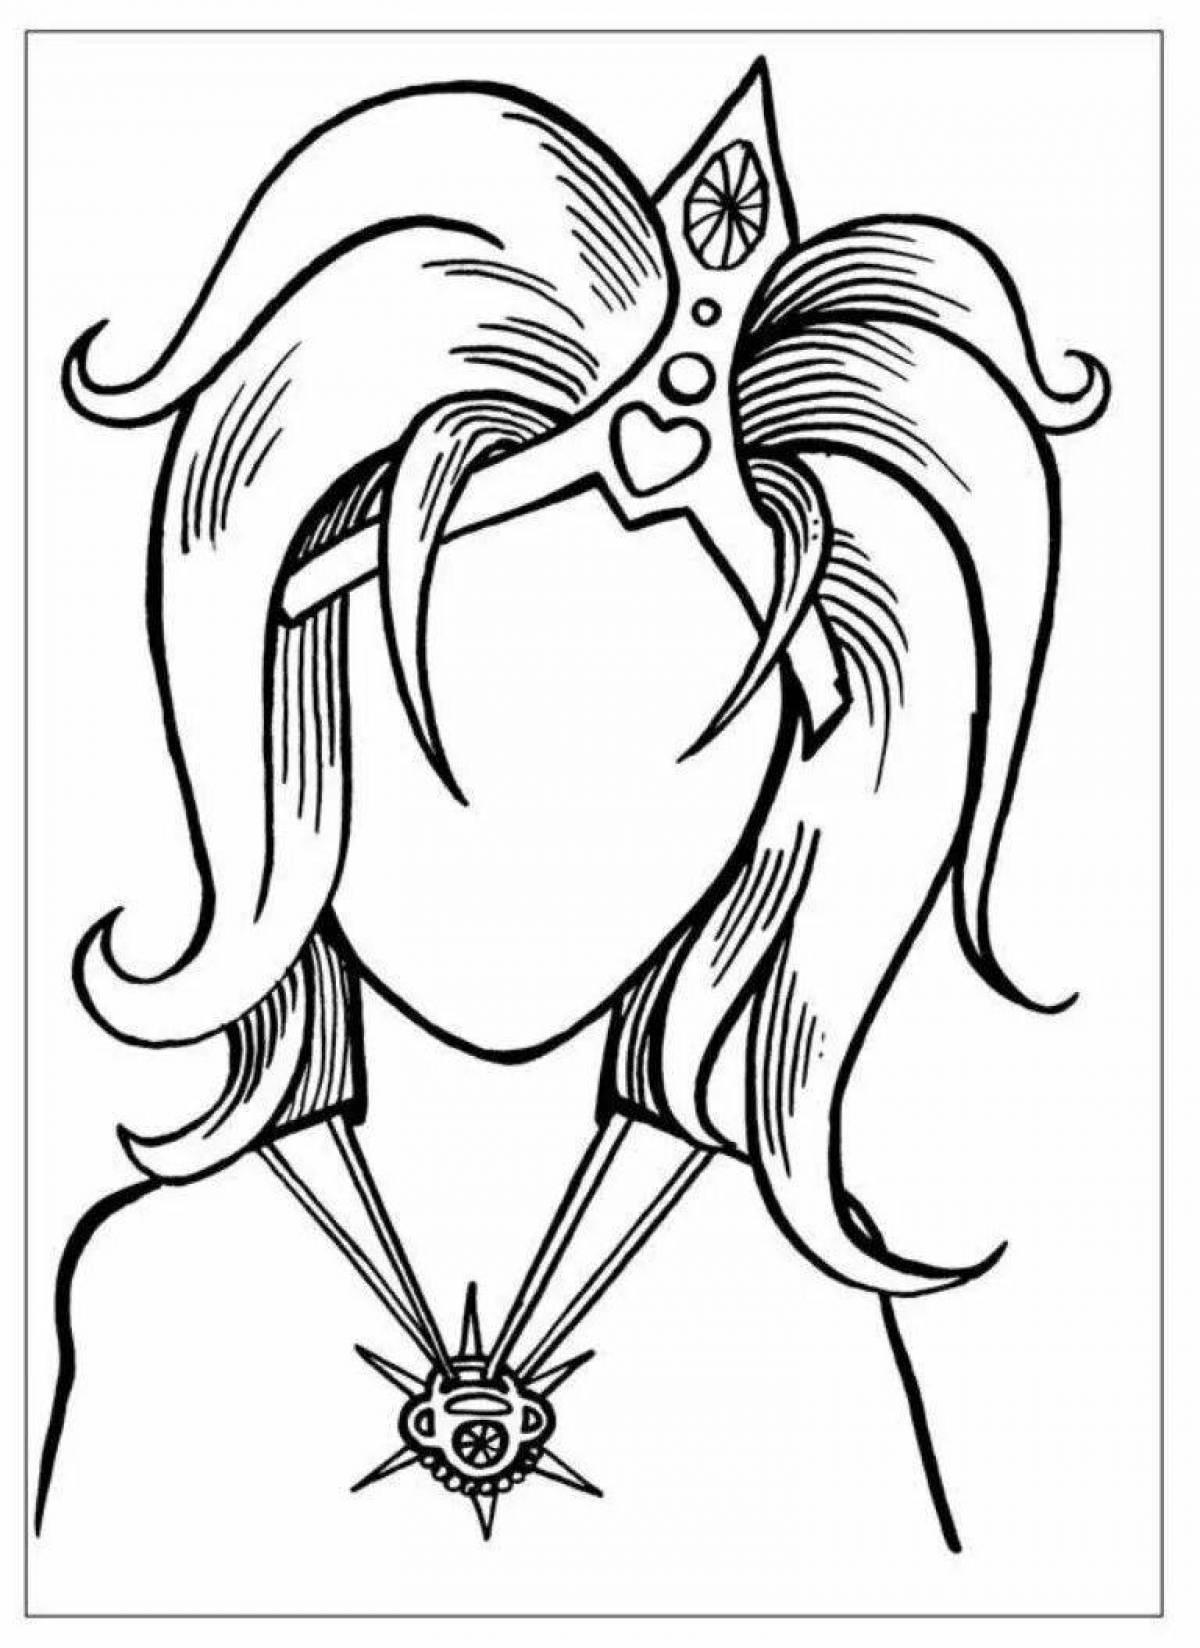 Animated face coloring page